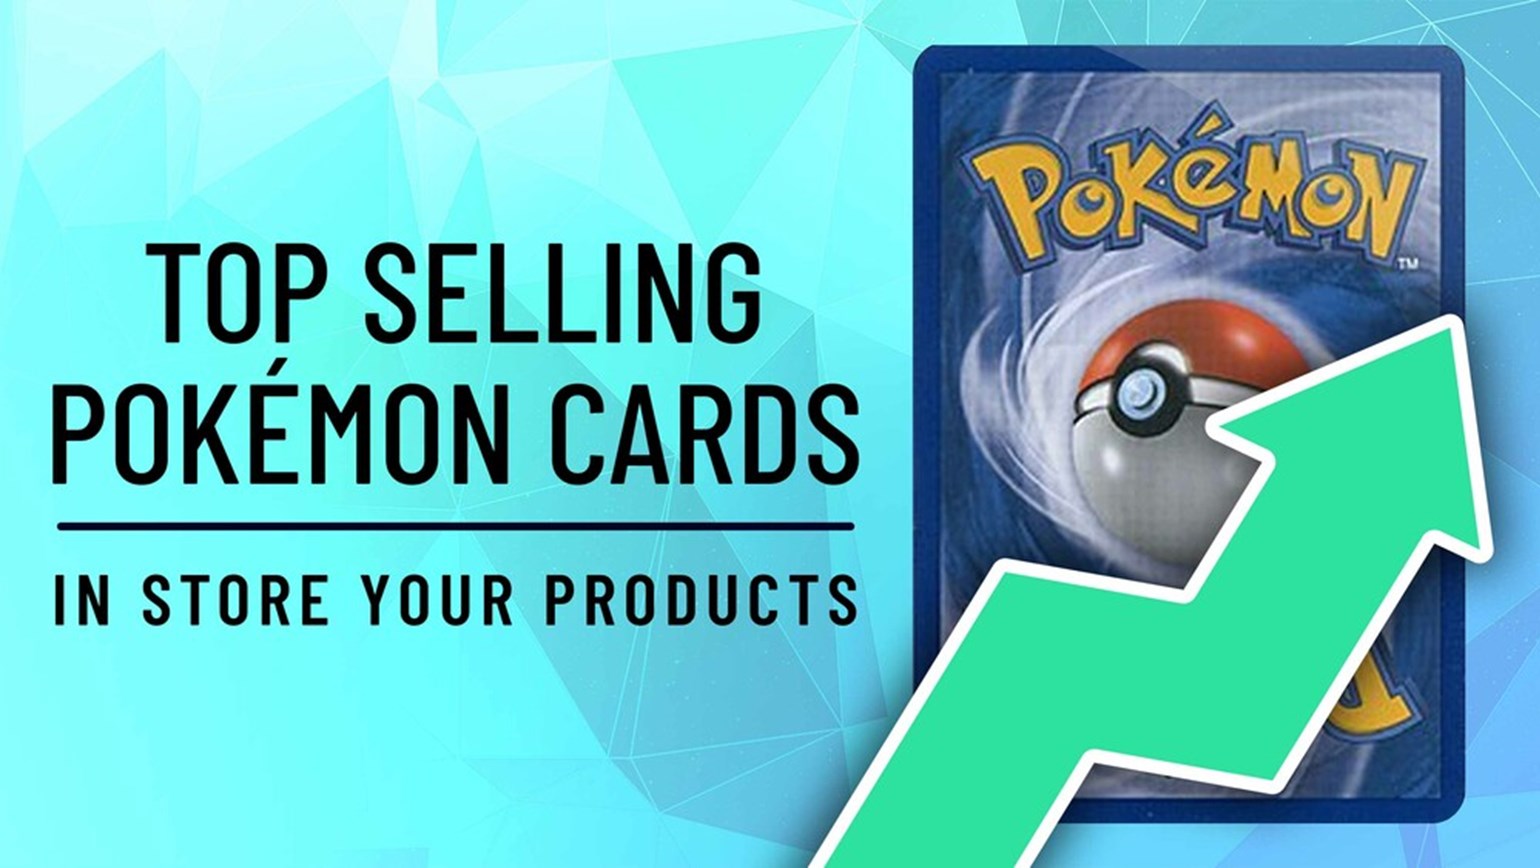 December Top Selling Pokémon Cards in SYP Under $25